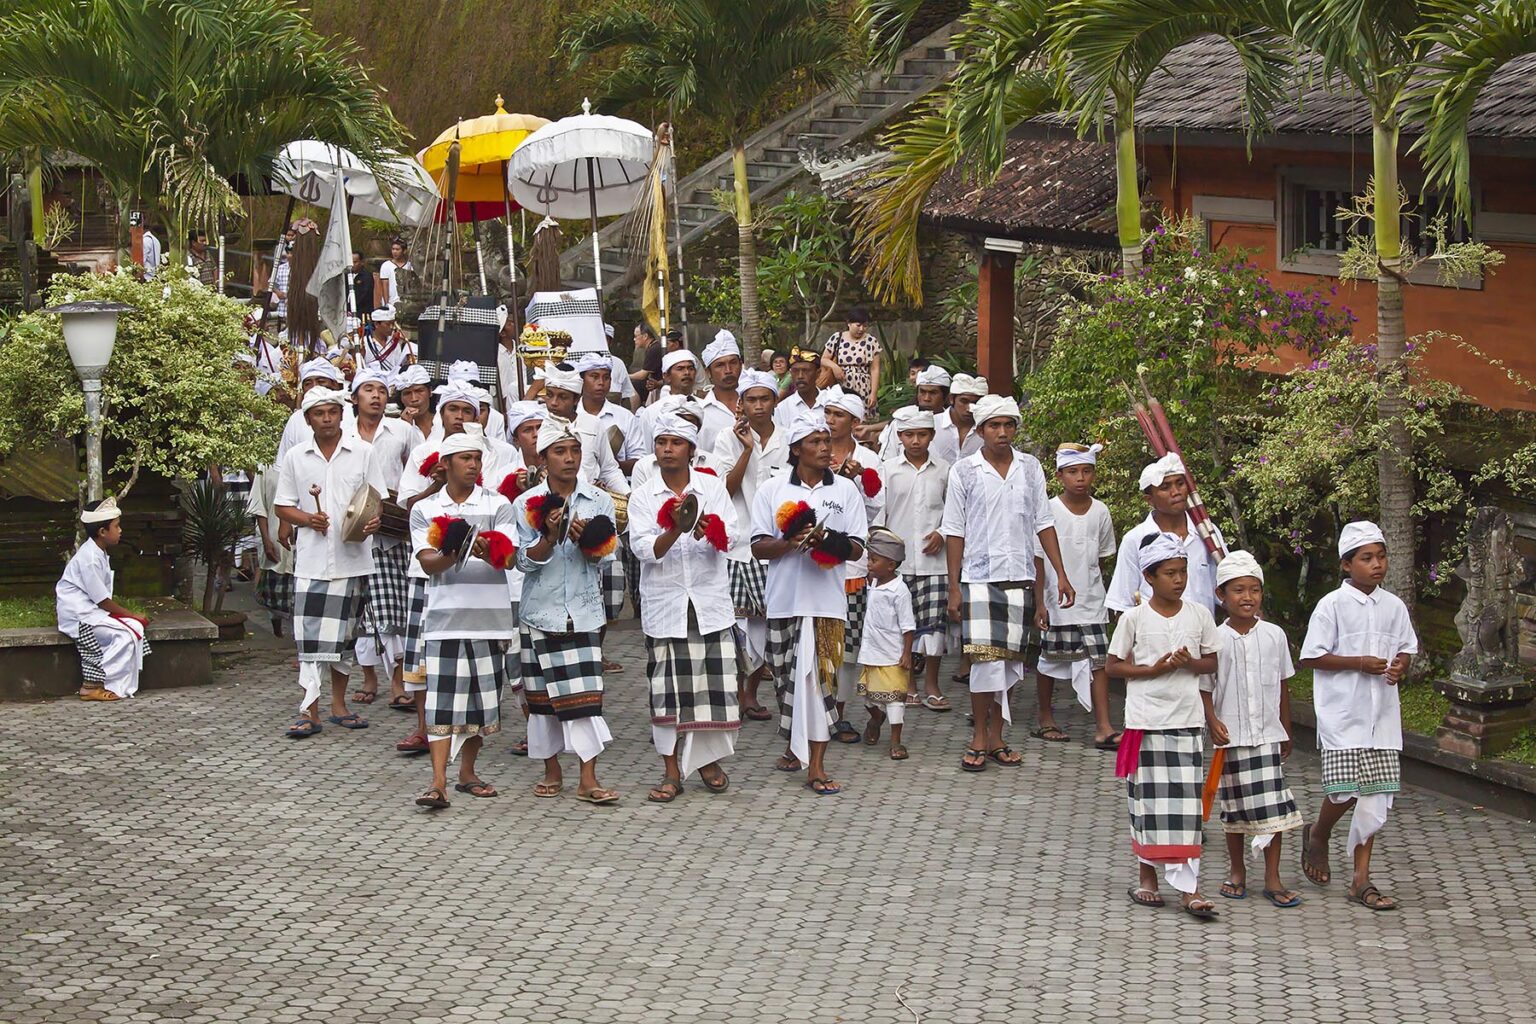 A procession of musicians are part of the ceremony at PURA TIRTA EMPUL TEMPLE COMPLEX during the GALUNGAN FESTIVAL - TAMPAKSIRING, BALI, INDONESIA